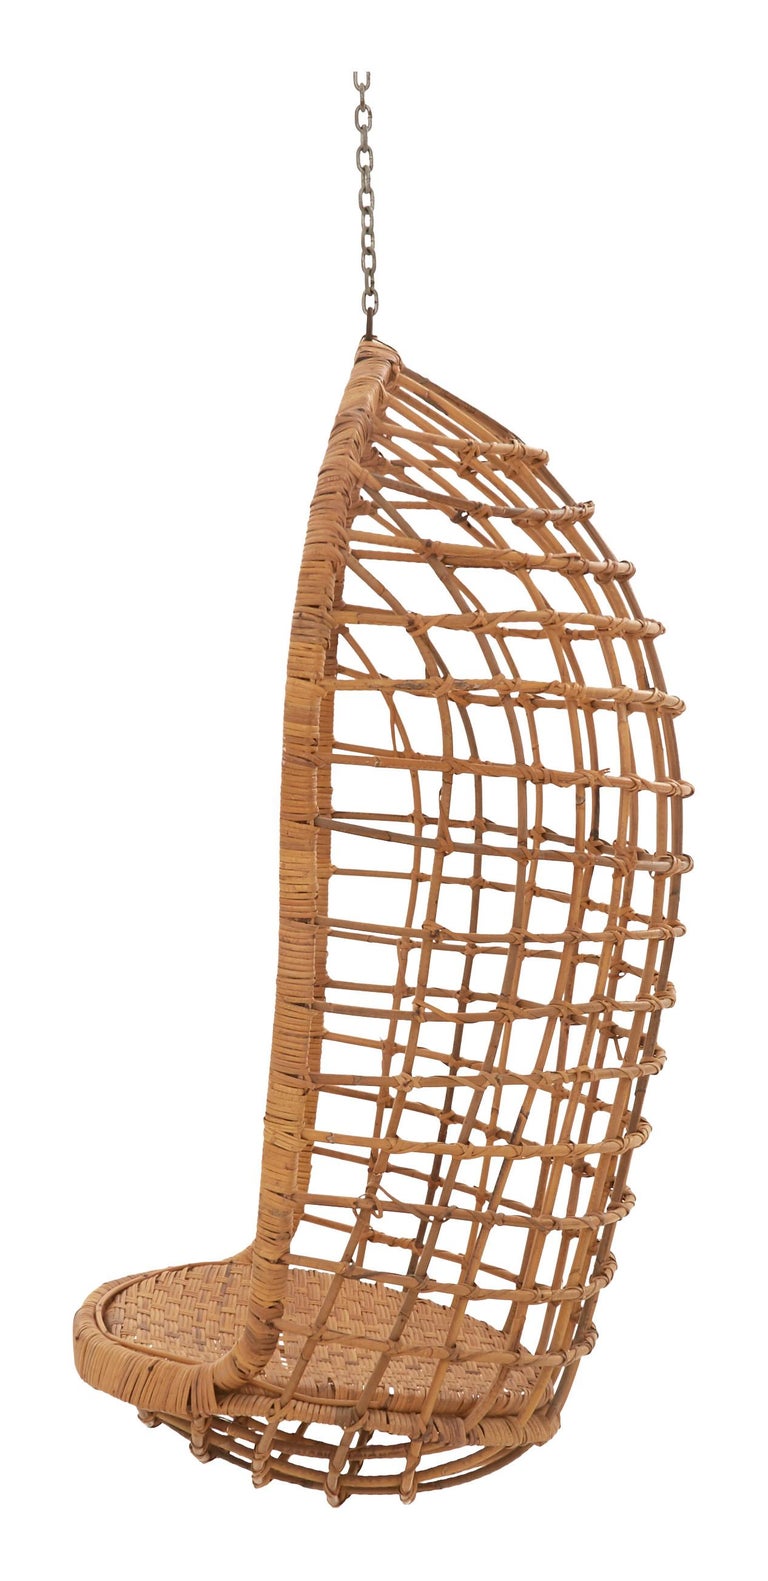 American Midcentury Rattan Hanging Chair For Sale